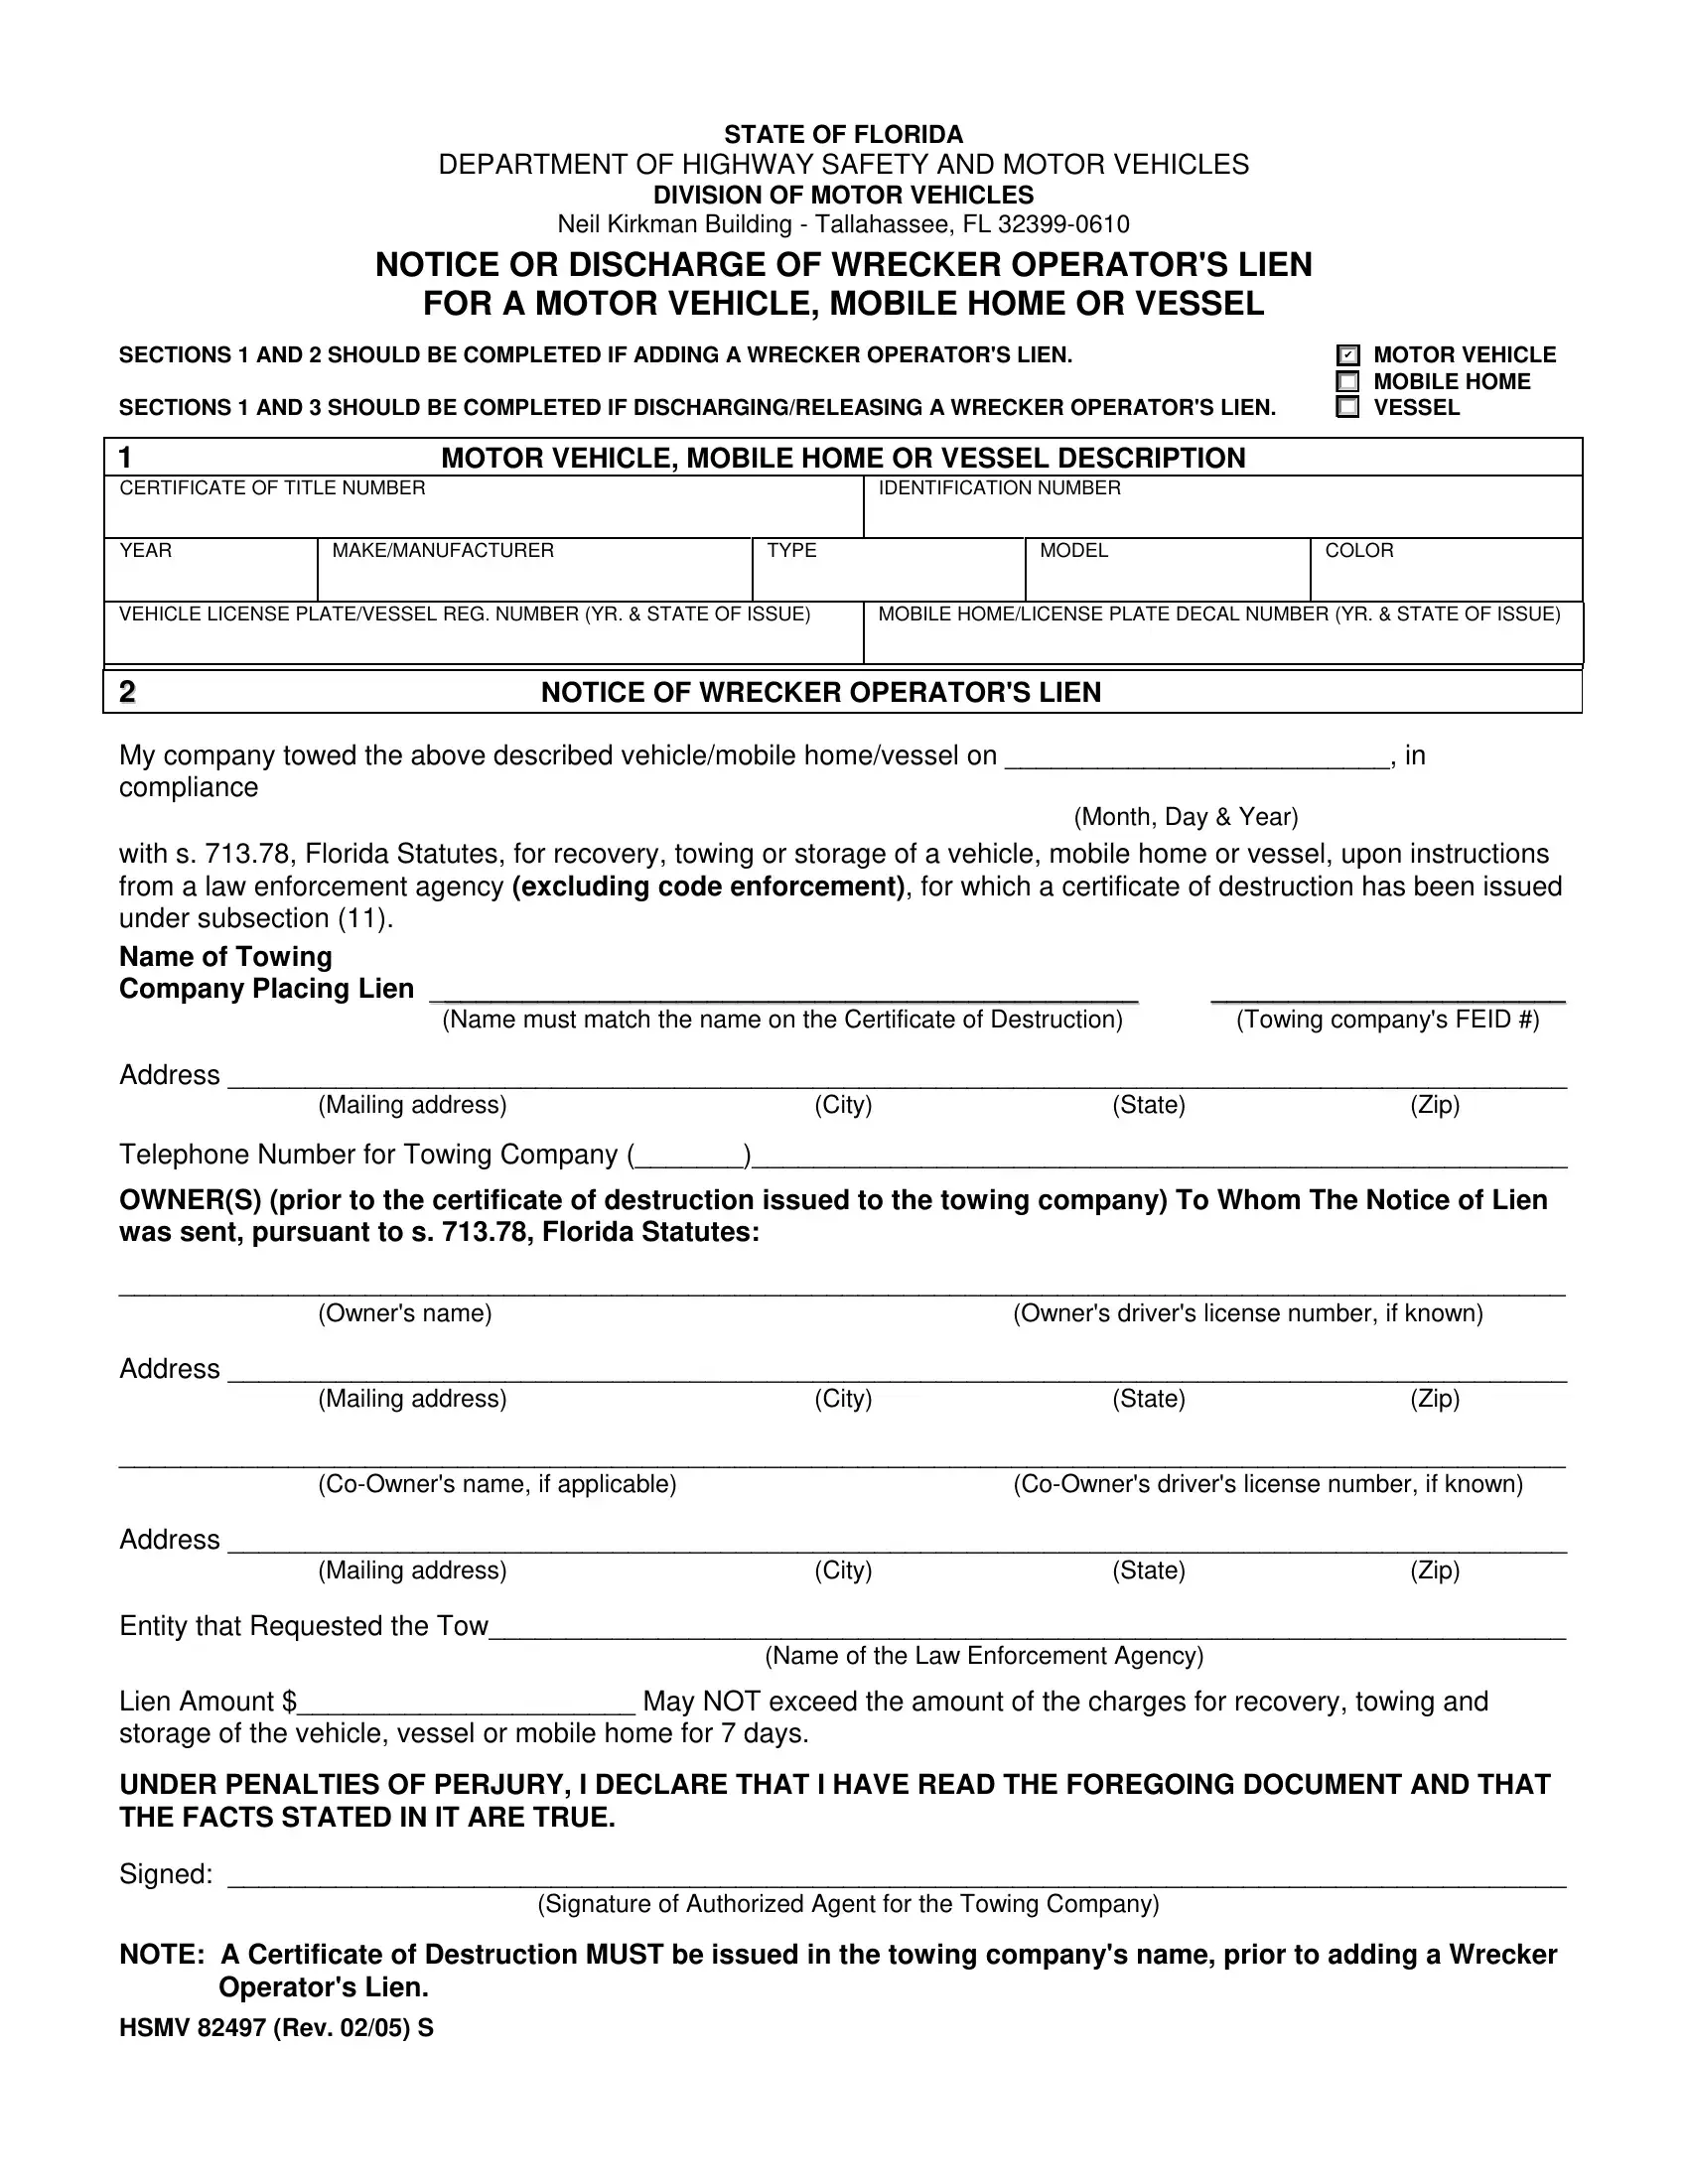 Fillable Online SCP 007 Service Contract Administrator Registration  Application.pub. Private Property Tow Form - Enables property owners to  have parked vehicles towed. Fax Email Print - pdfFiller